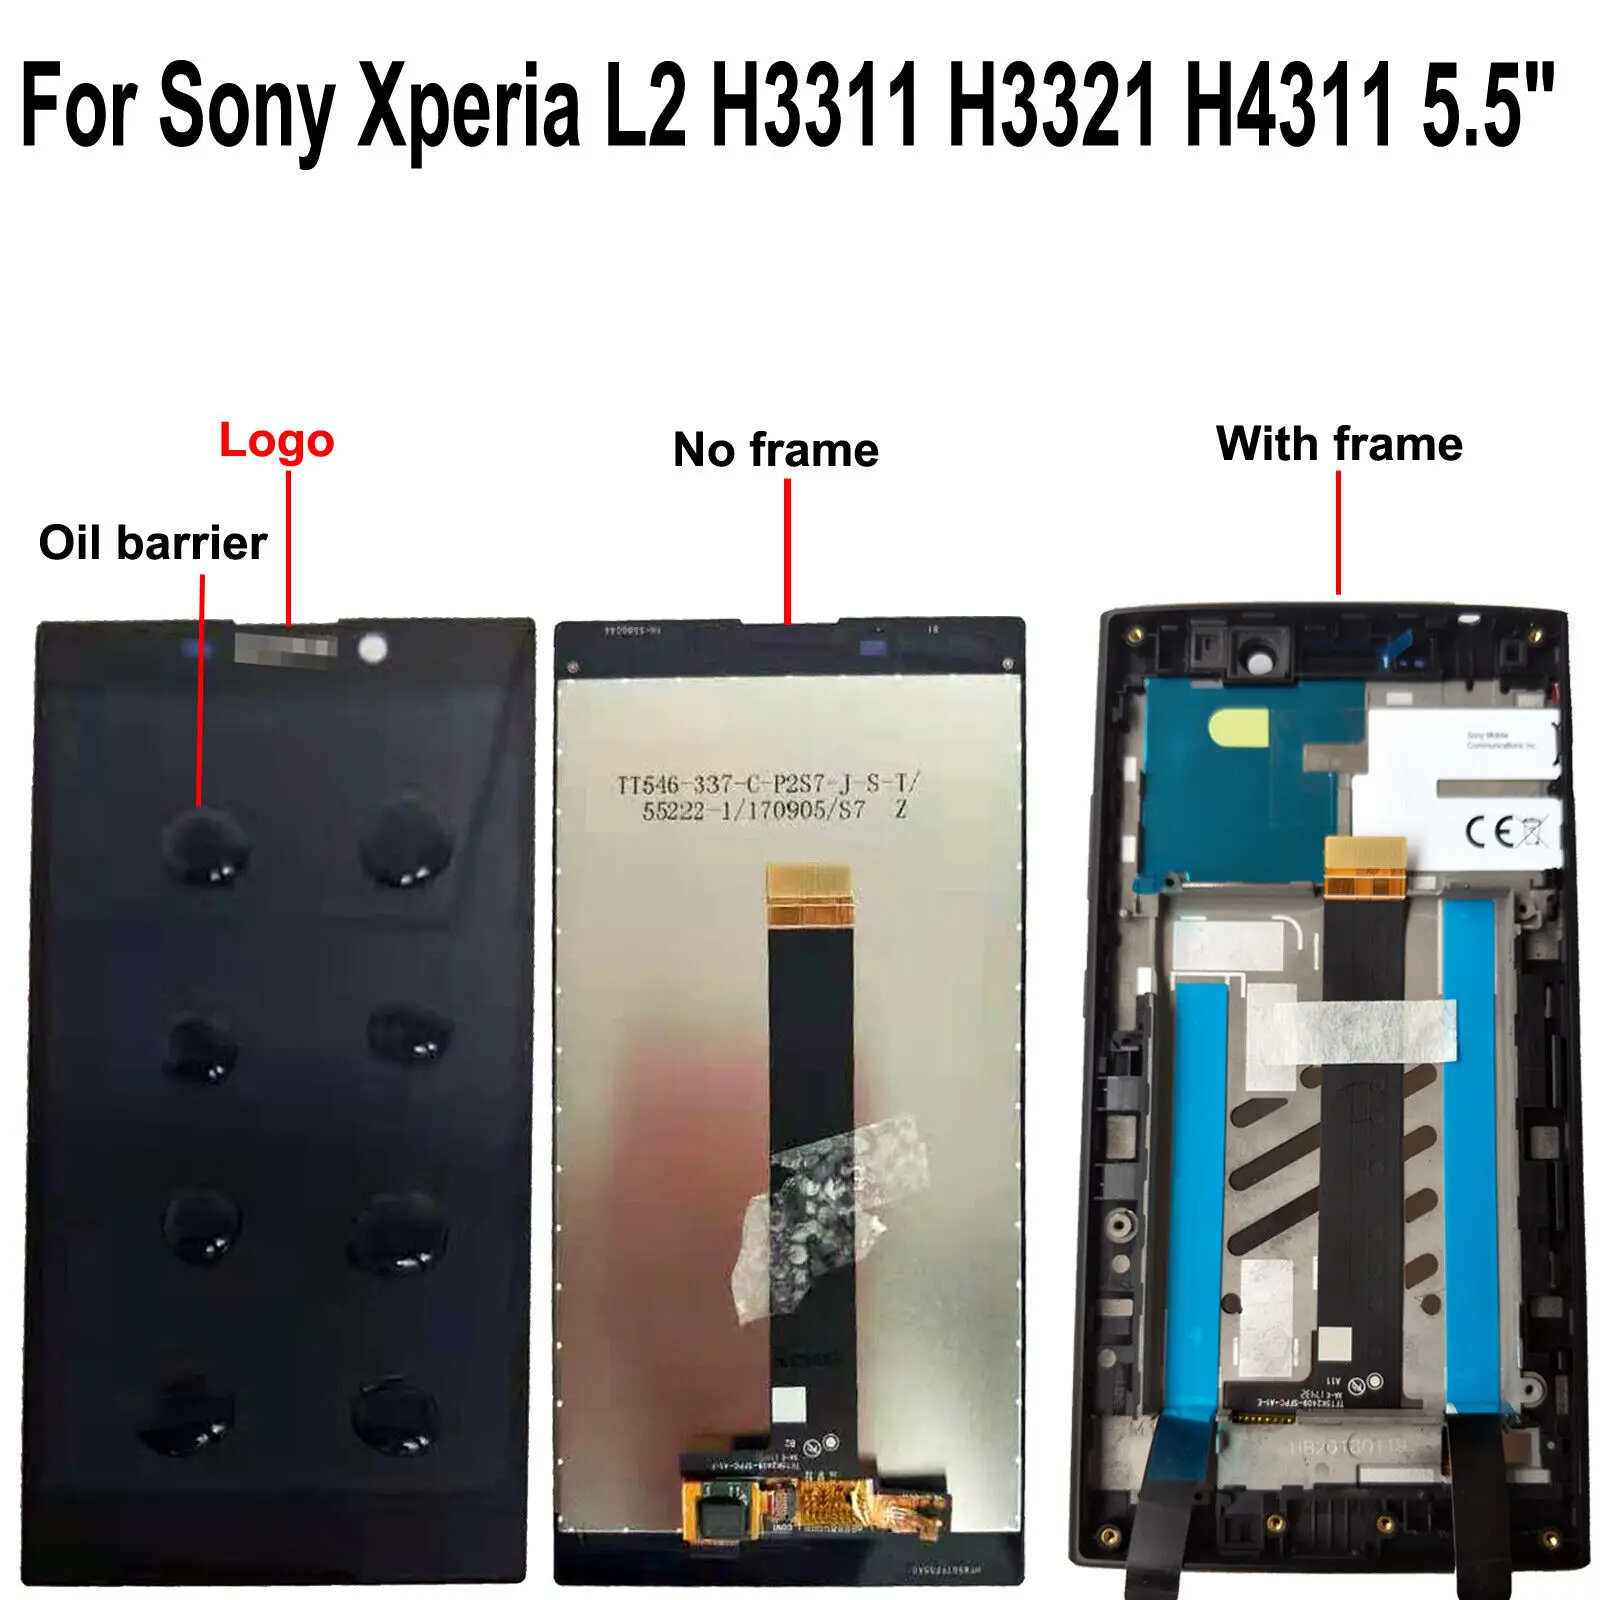 

For Sony Xperia L2 H3311 H3321 H4311 5.5" New LCD Display Touch Screen Digitizer